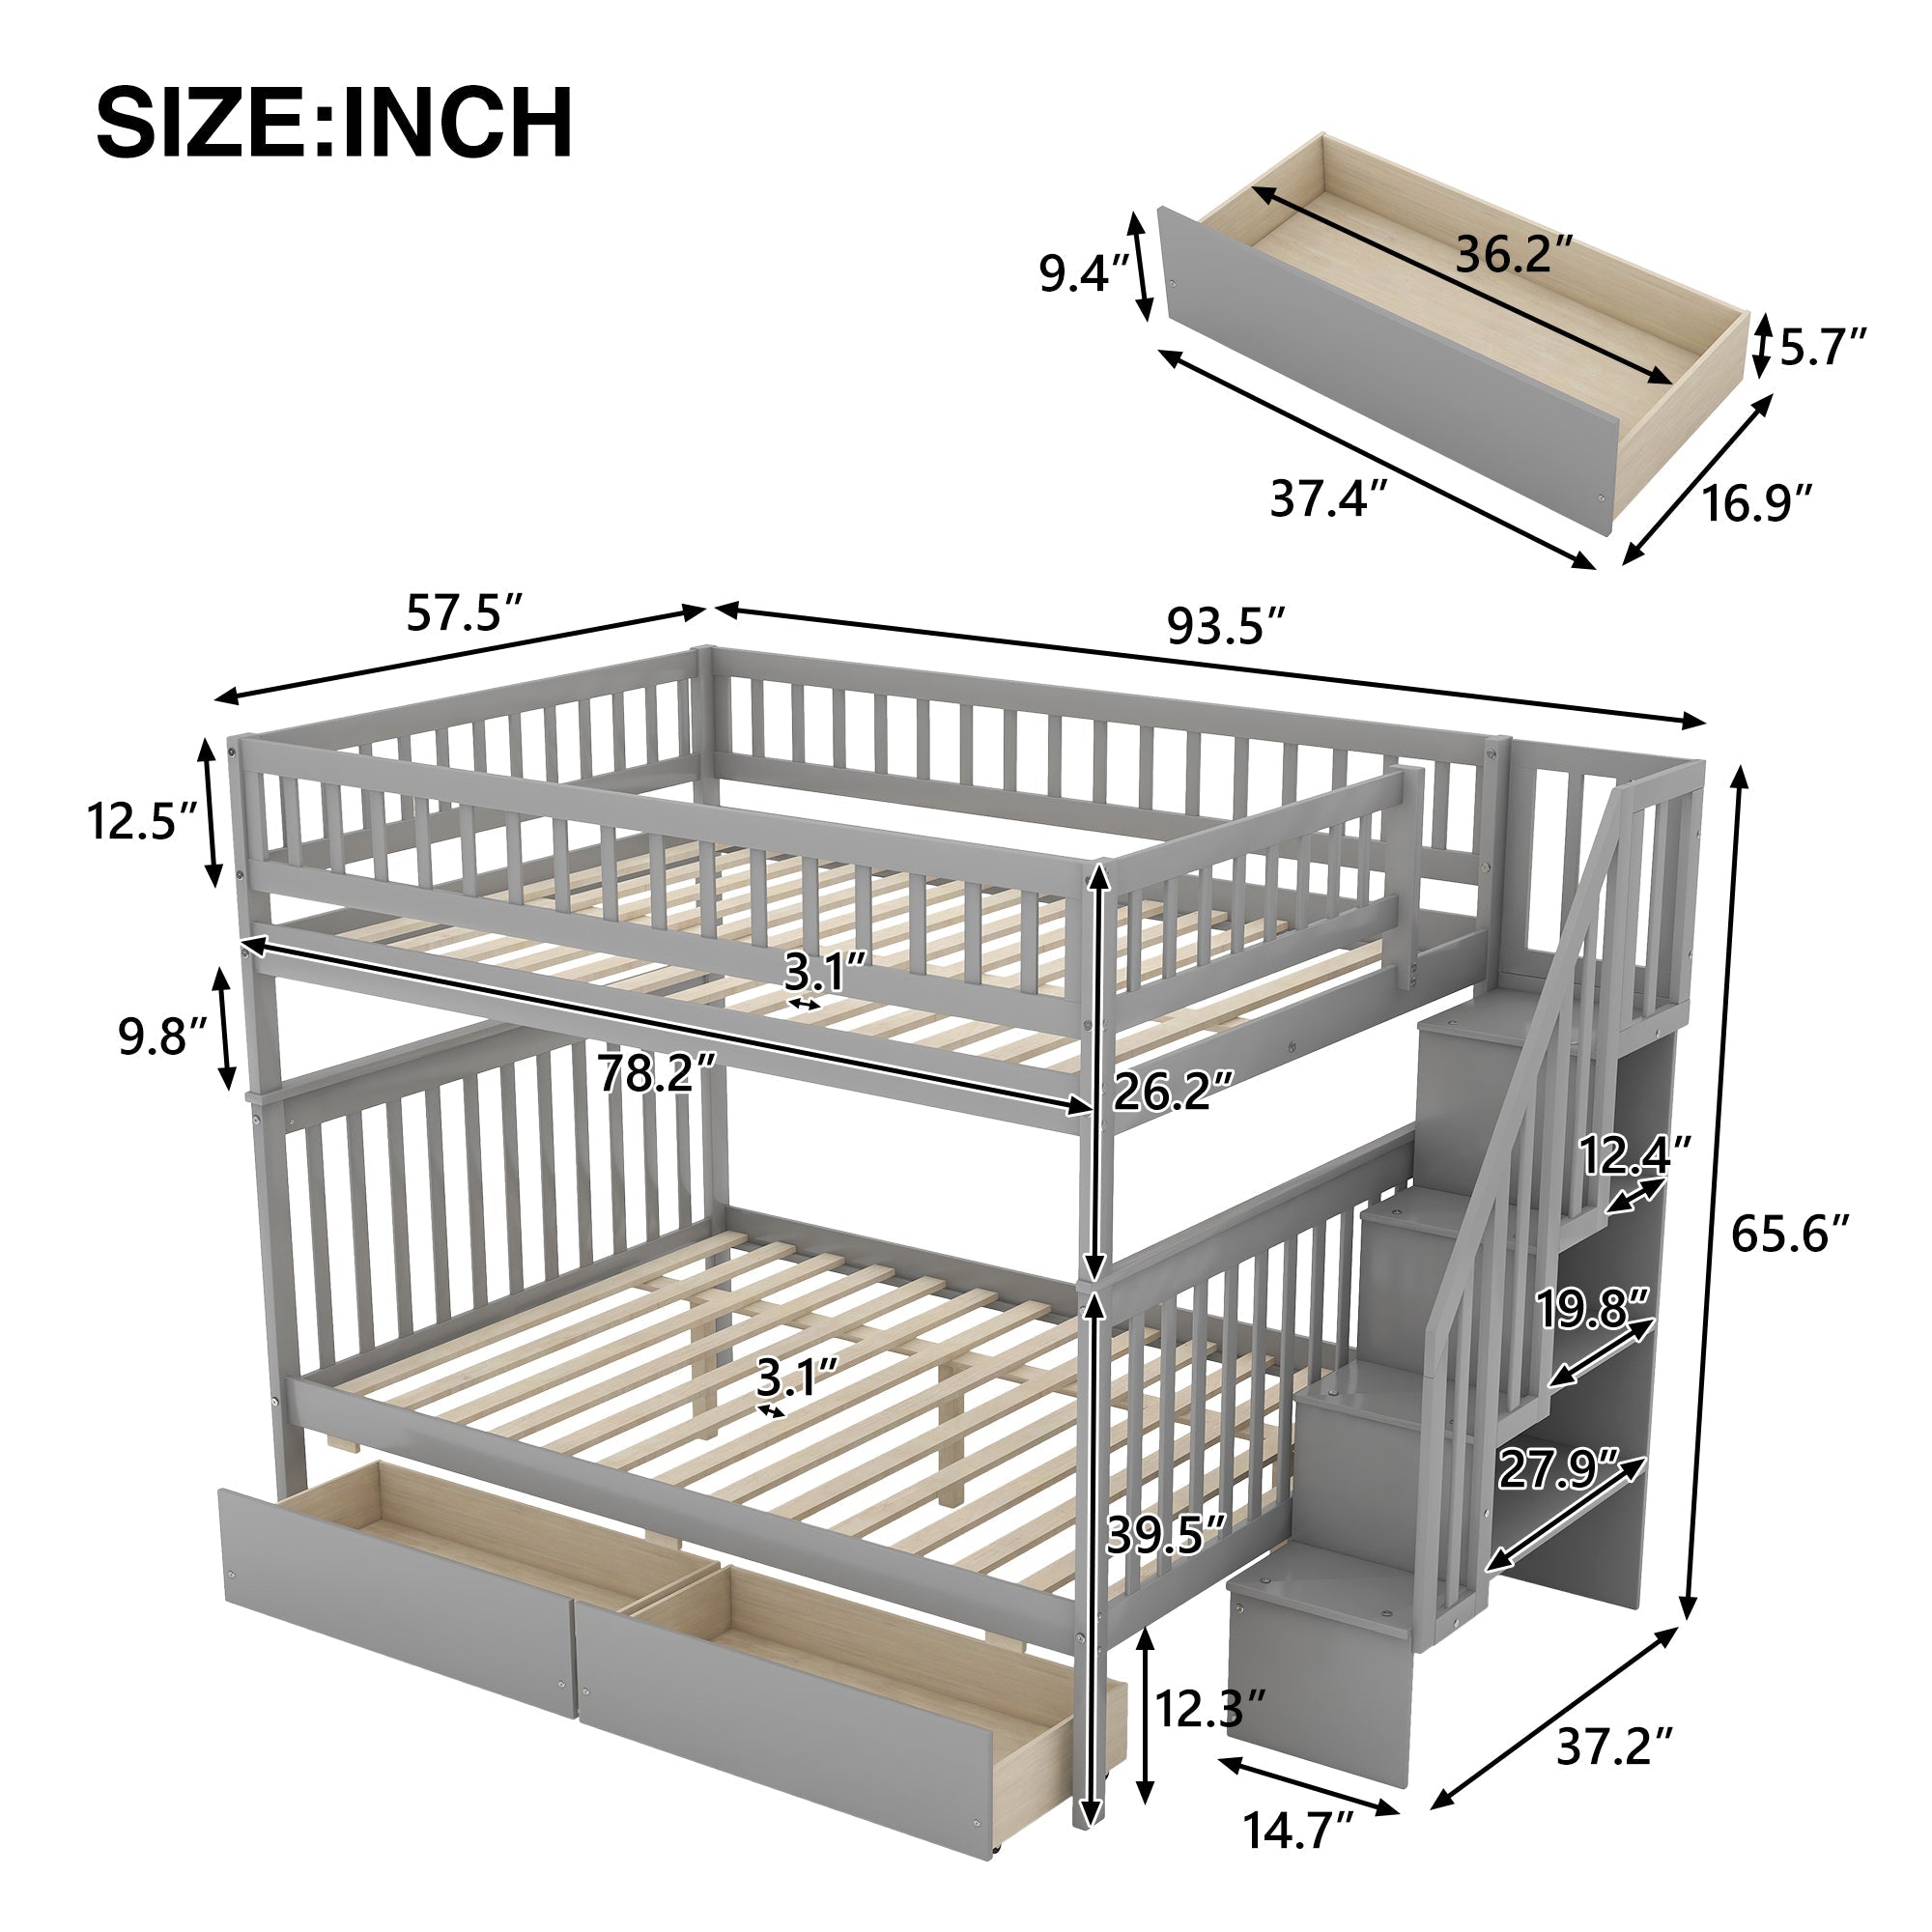 Euroco Full over Full Bunk Bed with Storage Shelves and 2 Under Storage Drawers for Kids Room